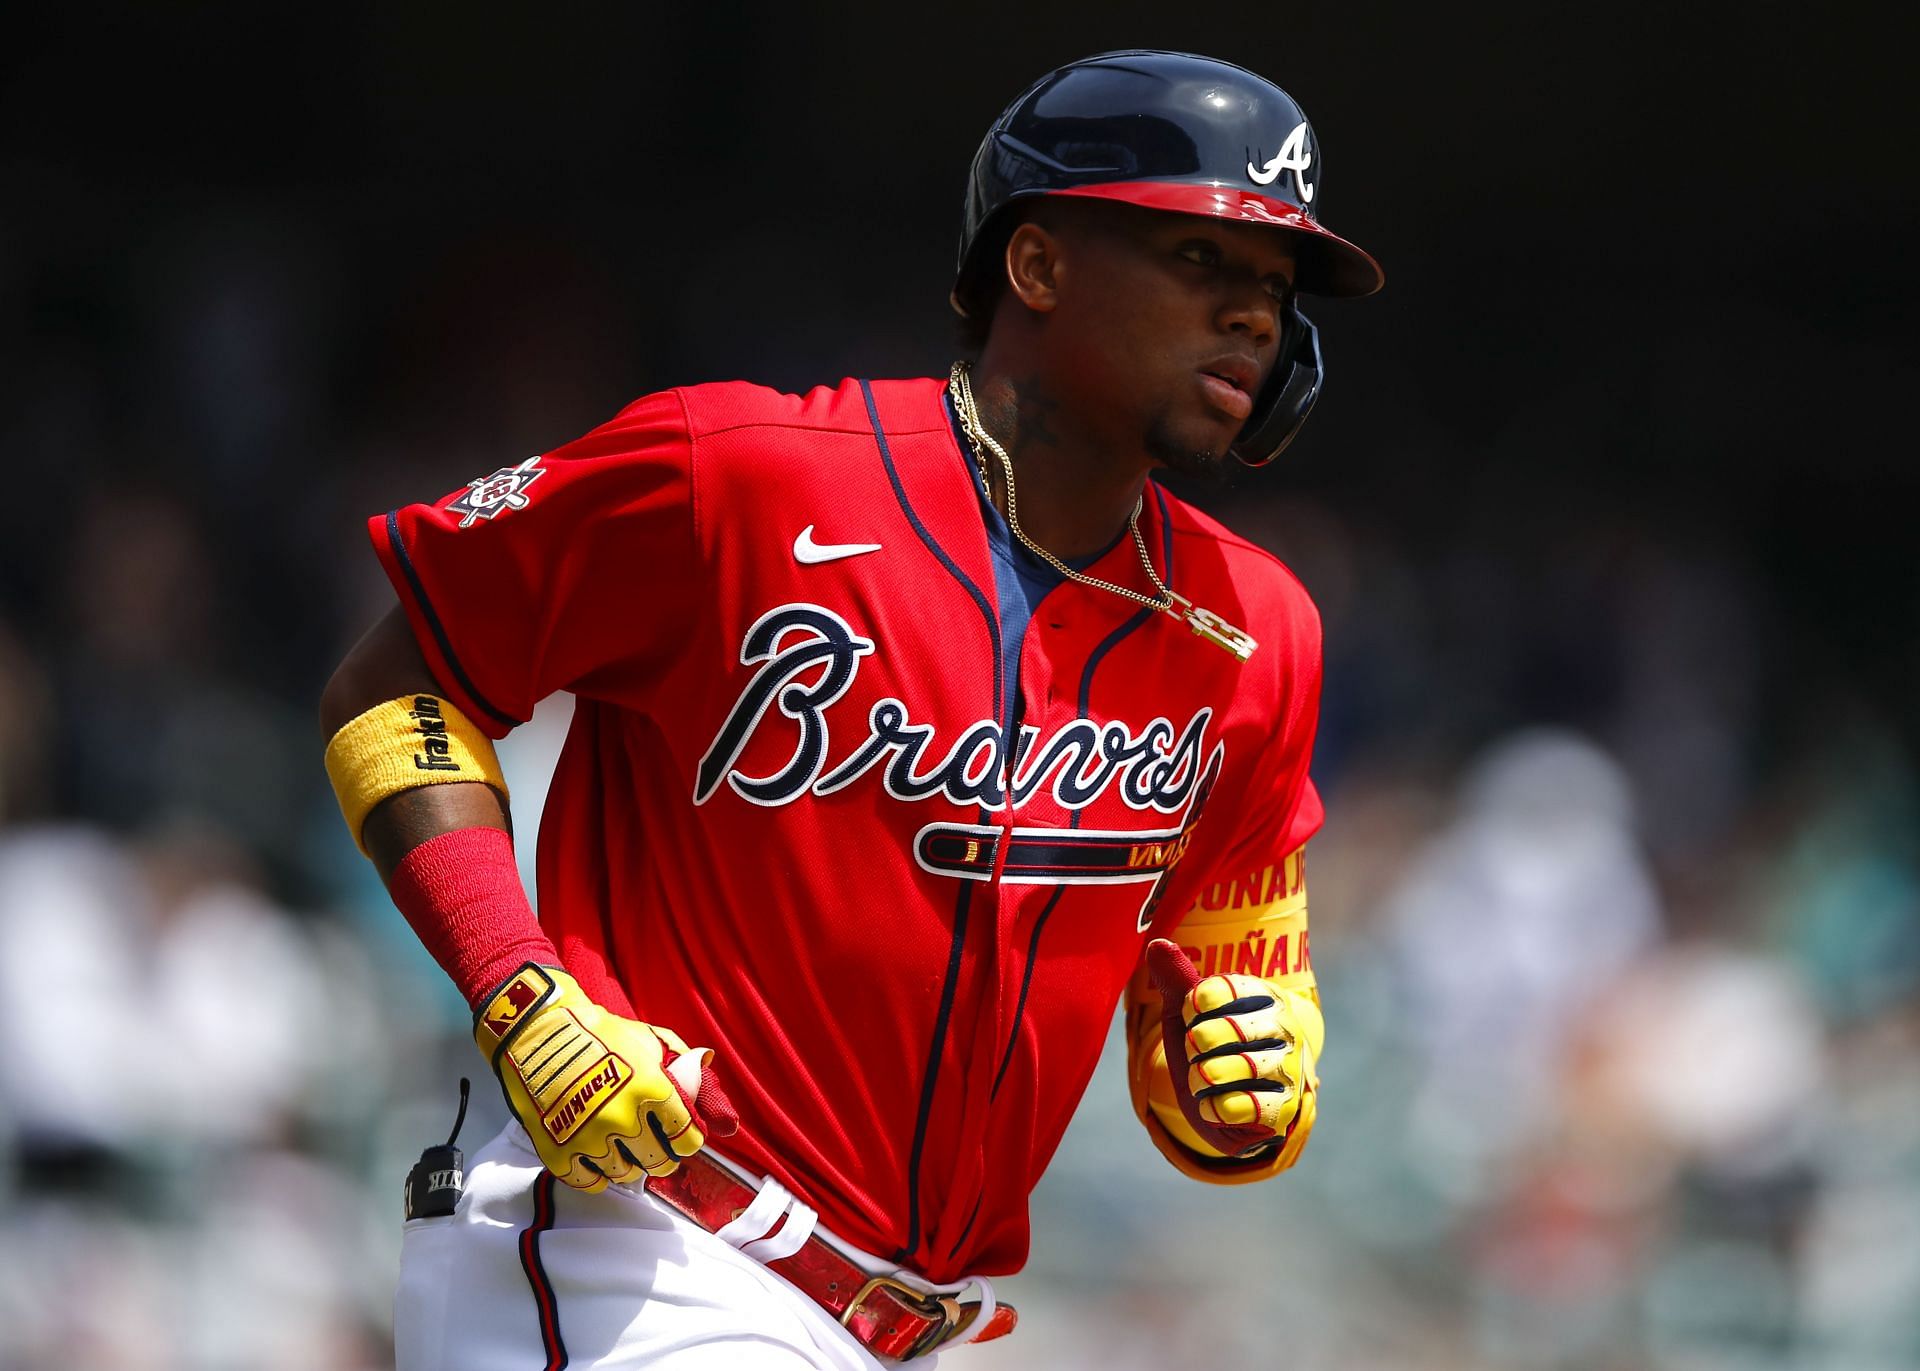 Injury concerns are mounting for the young Braves star.